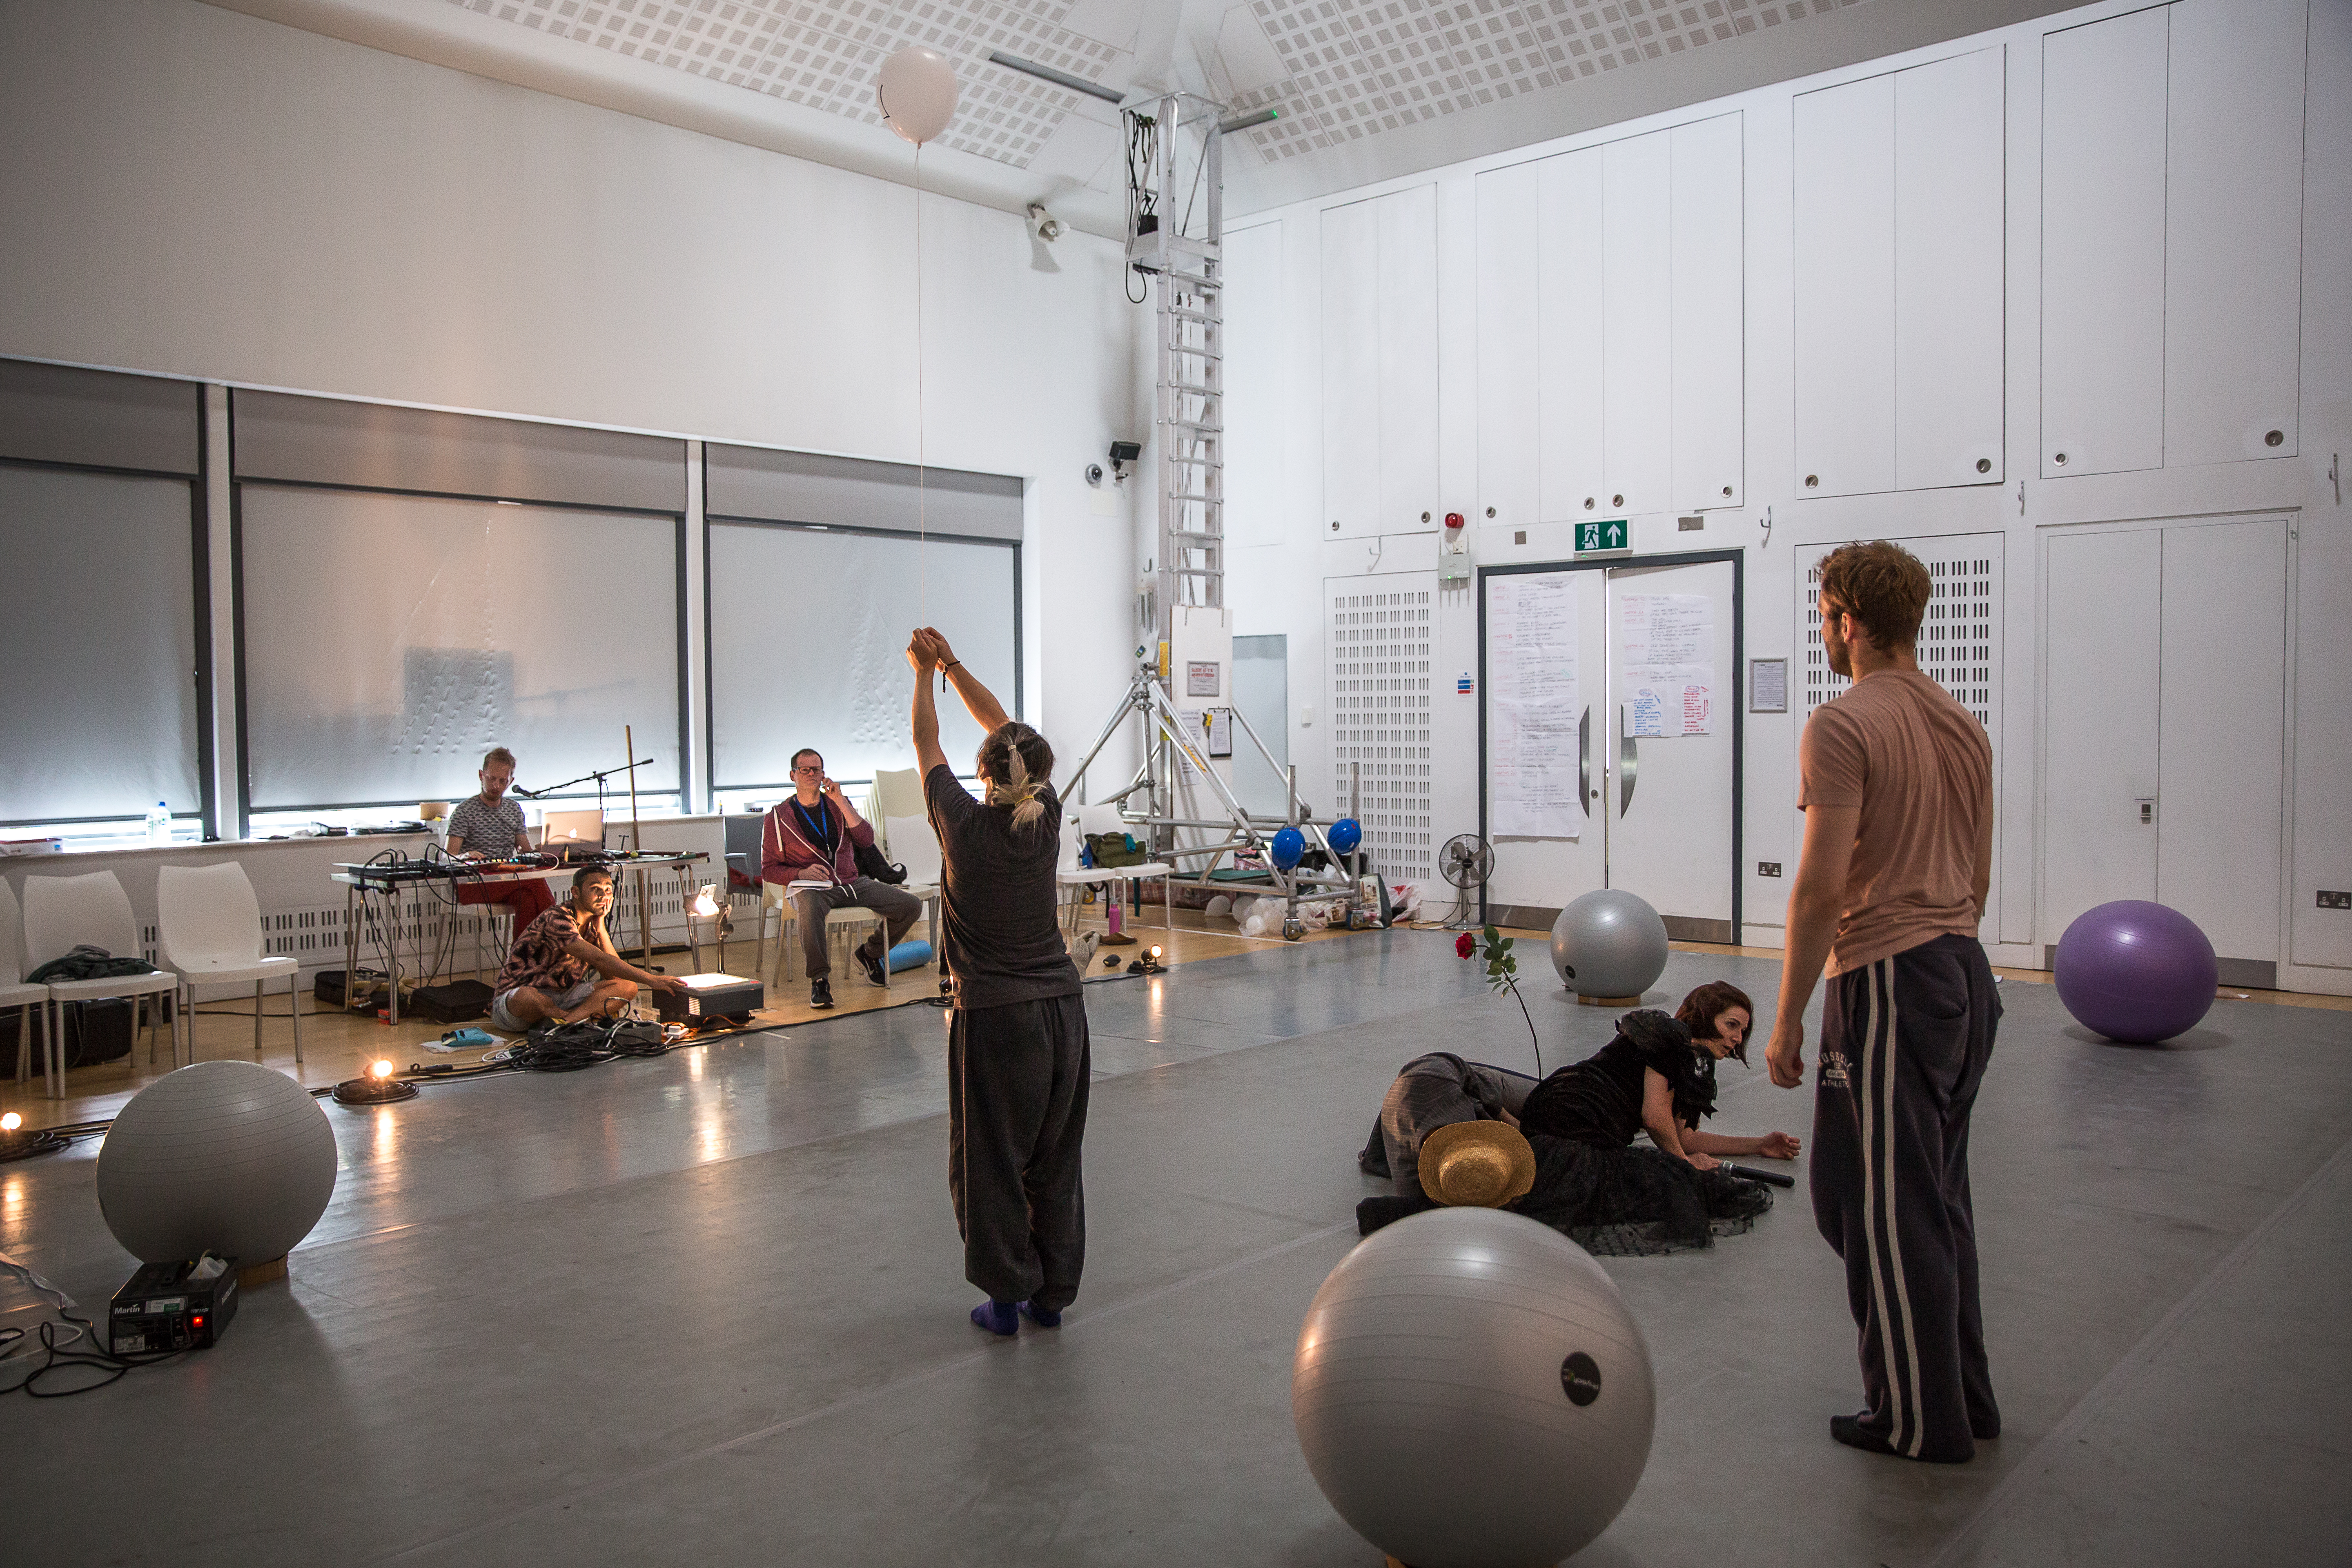 Protein Dance rehearsing in Creation Space with performers, musicians and choreographer